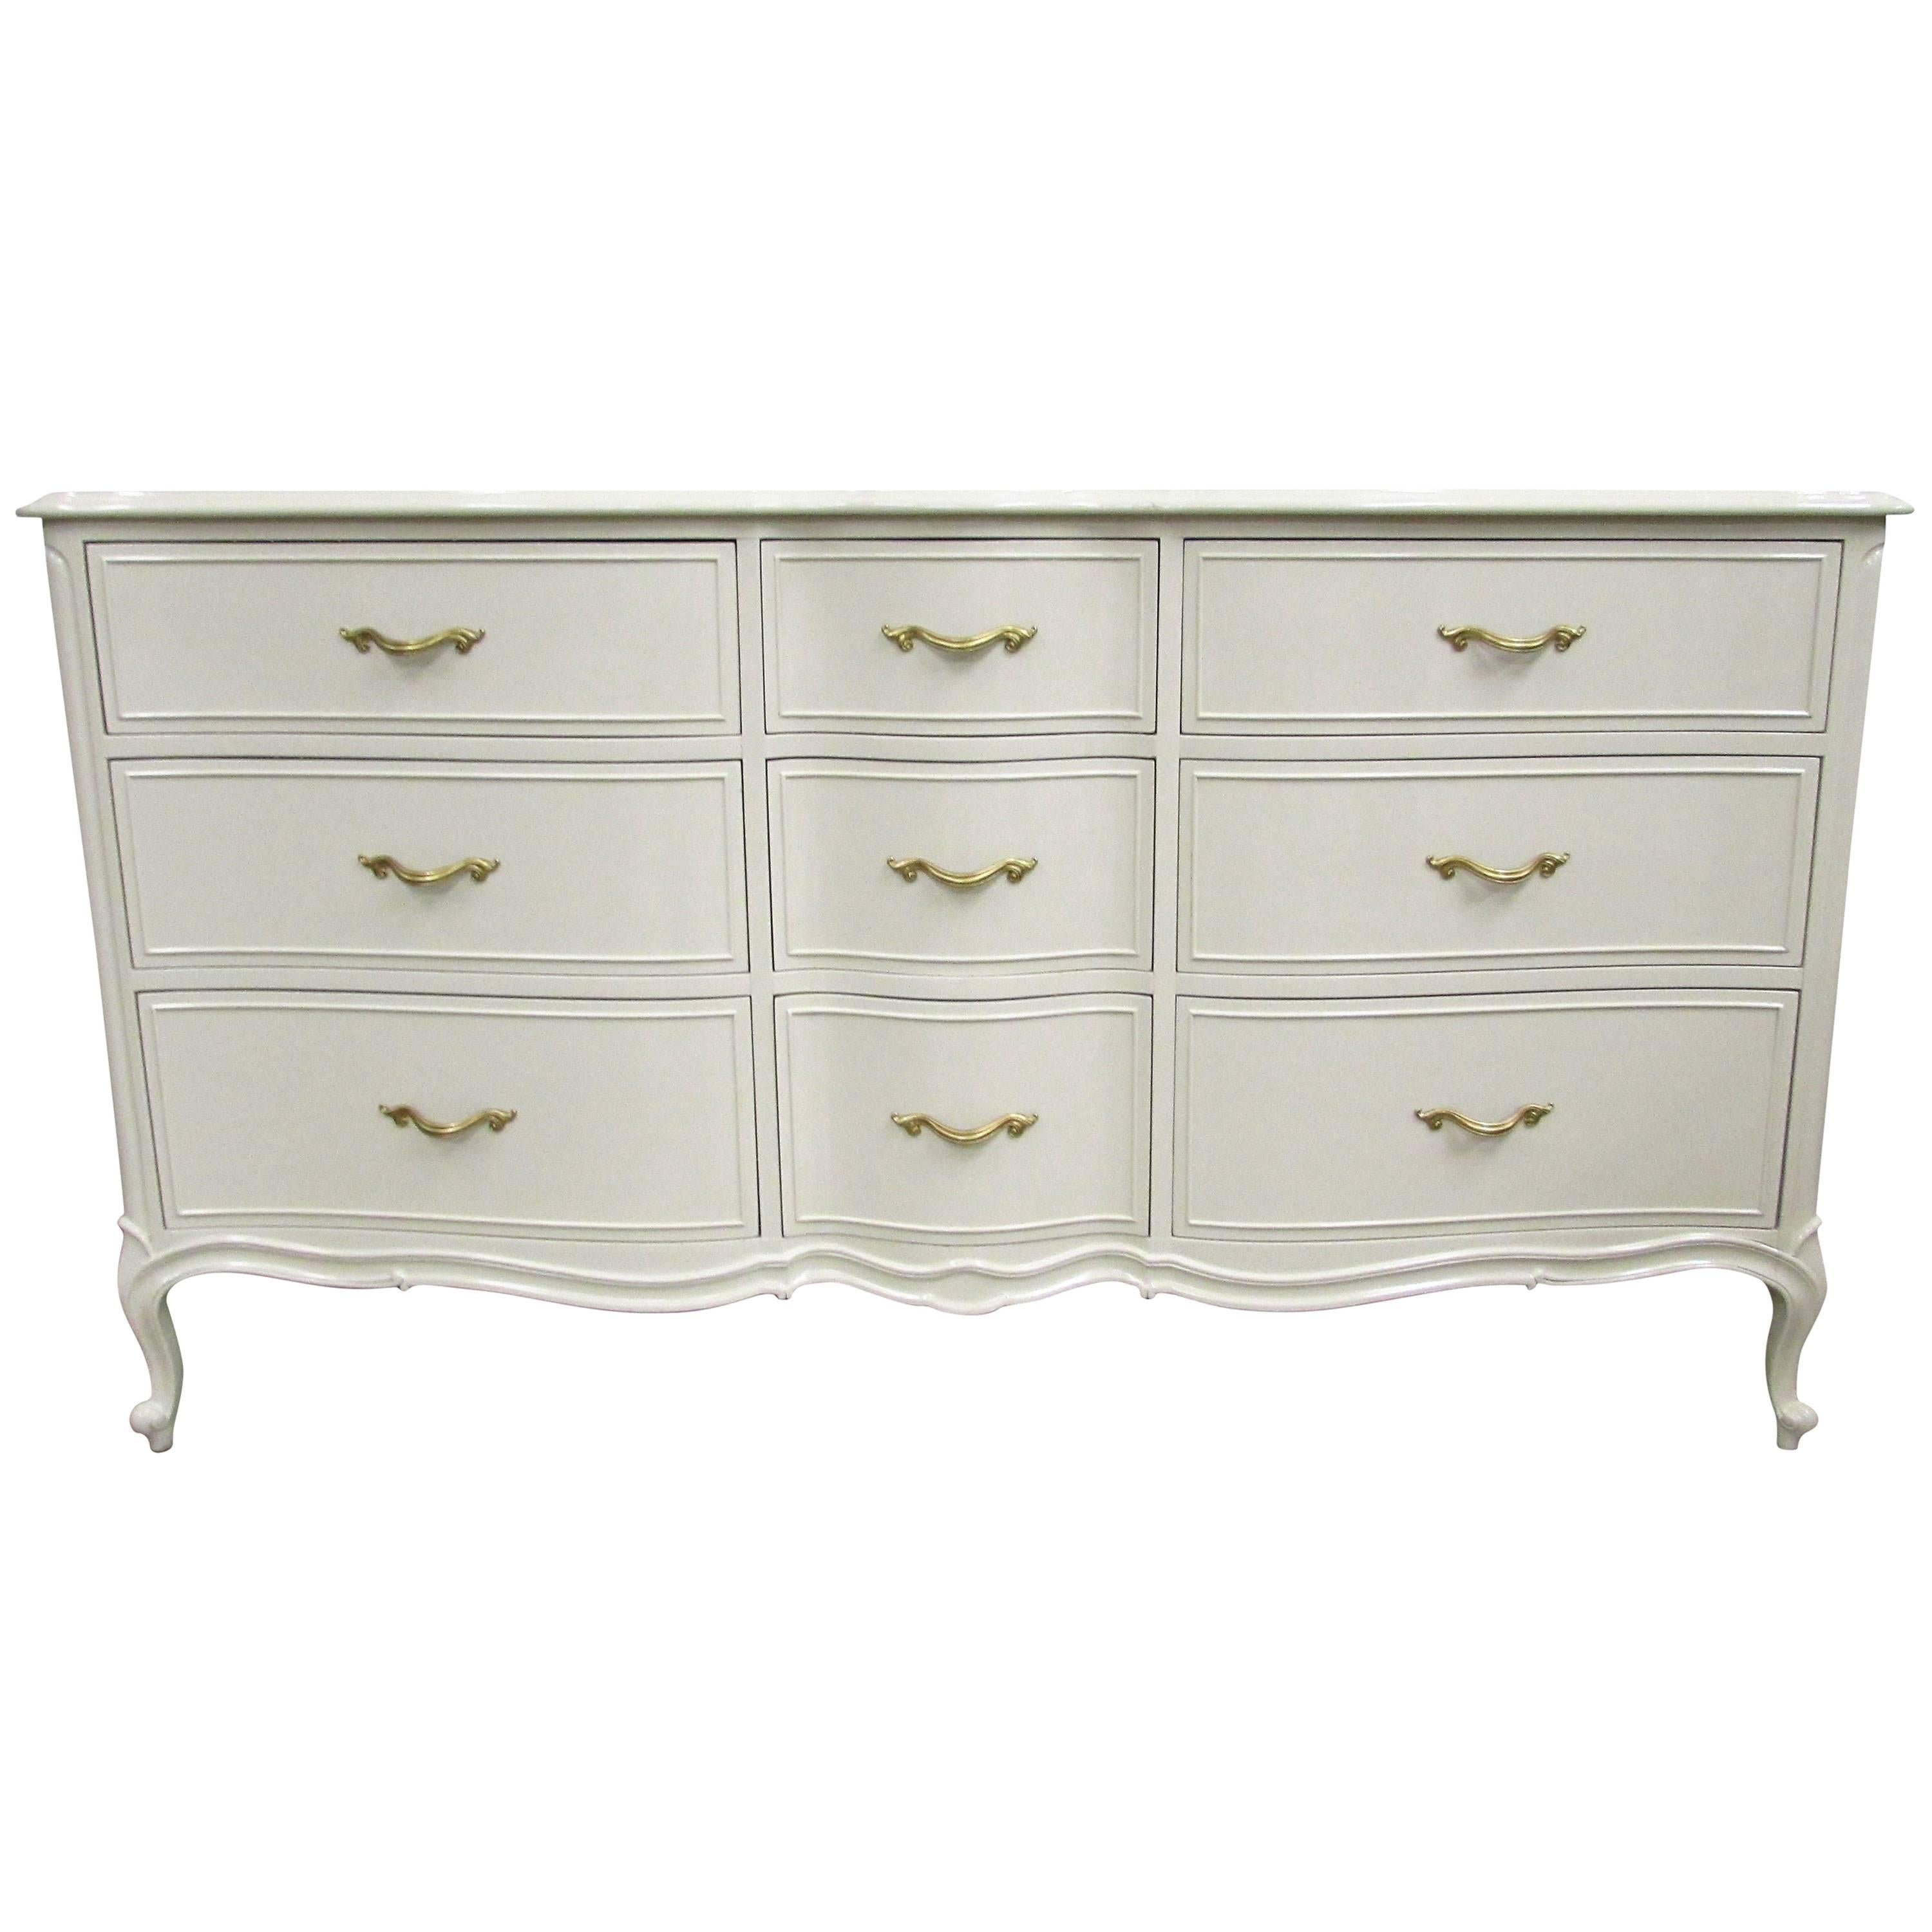 Drexel French Lacquered Chest of Drawers